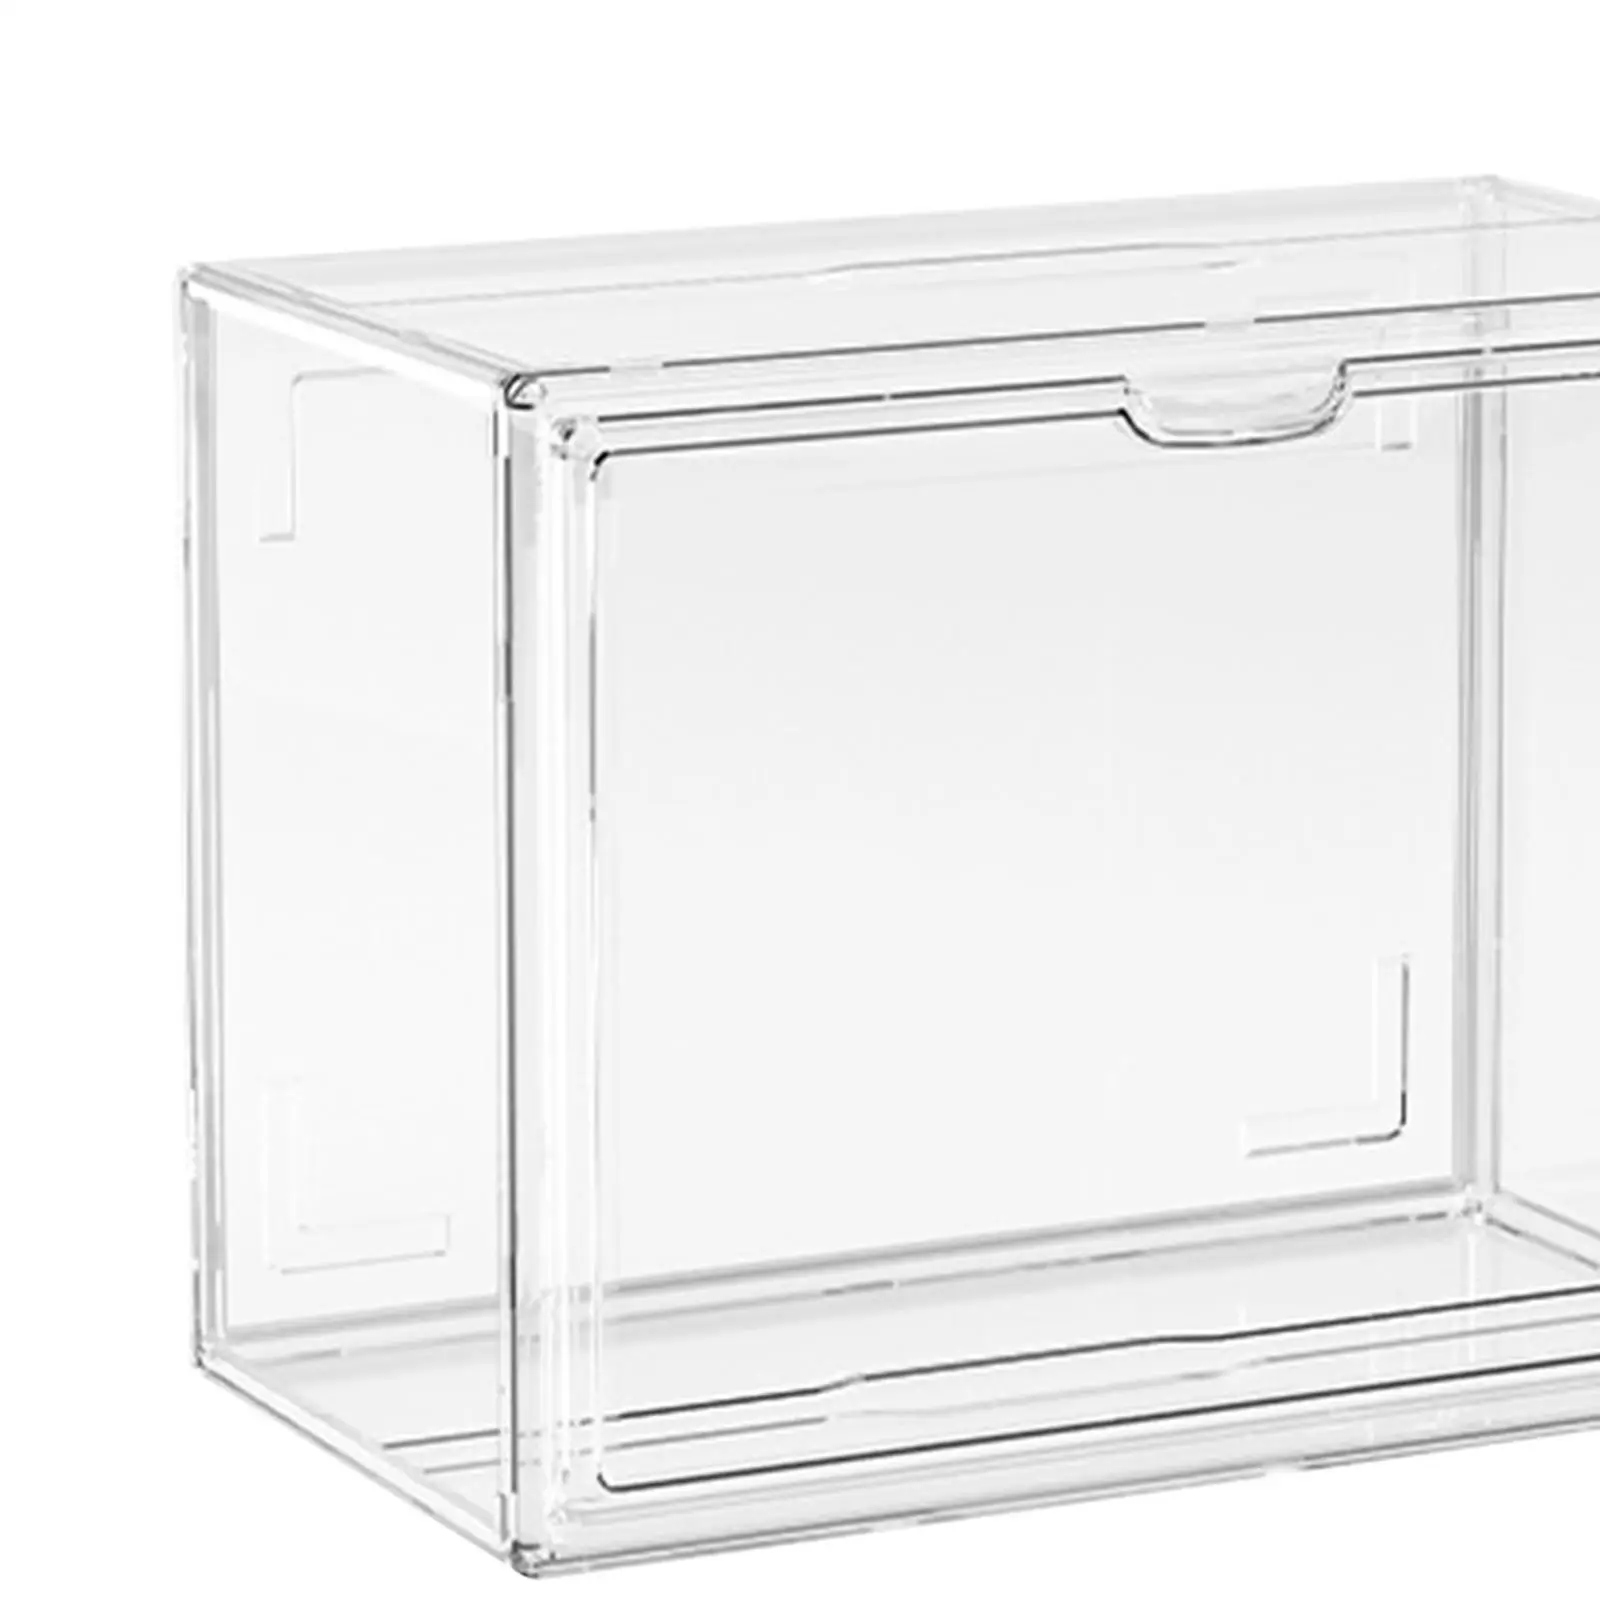 Acrylic Display Case Dustproof Countertop Display Rack Versatile Stand Protection Shelf Display Box for Action Figure Toys